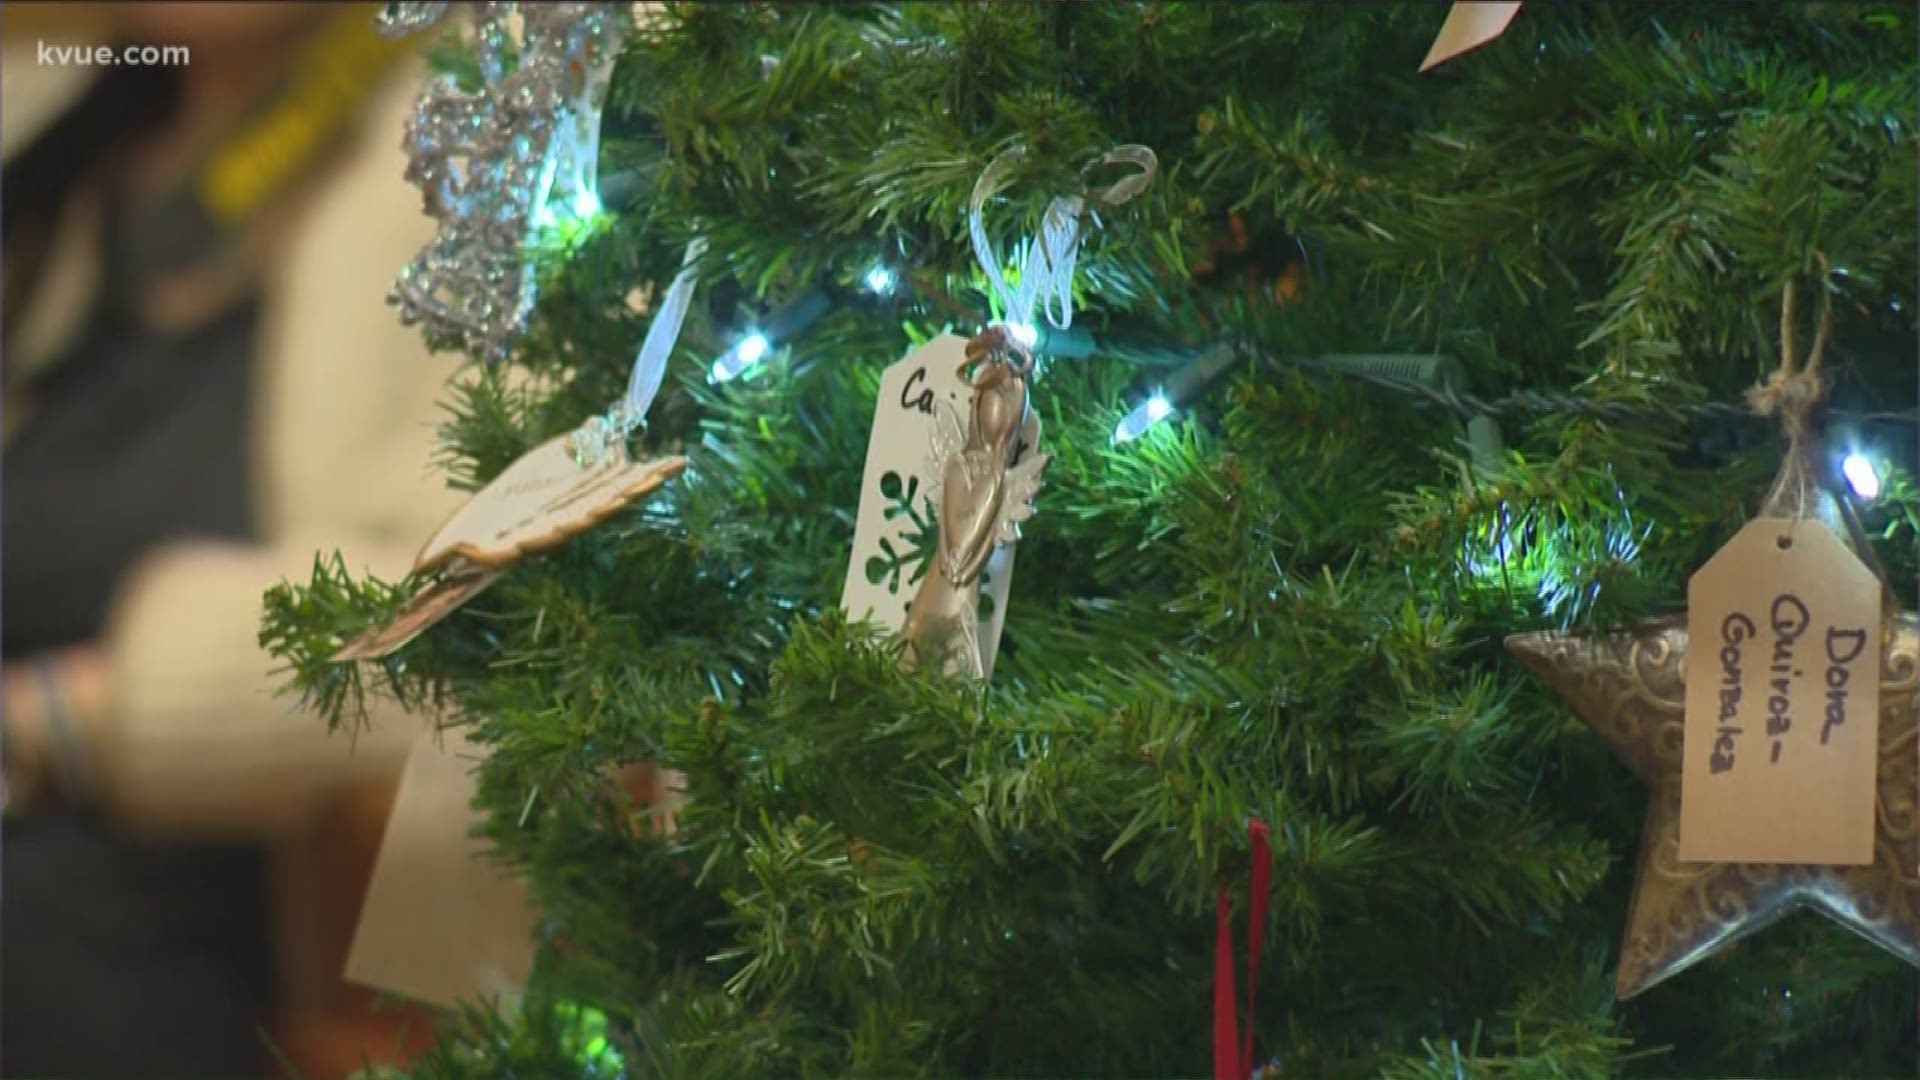 The "Trees of Angels" honor the victims and survivors of violent crimes.